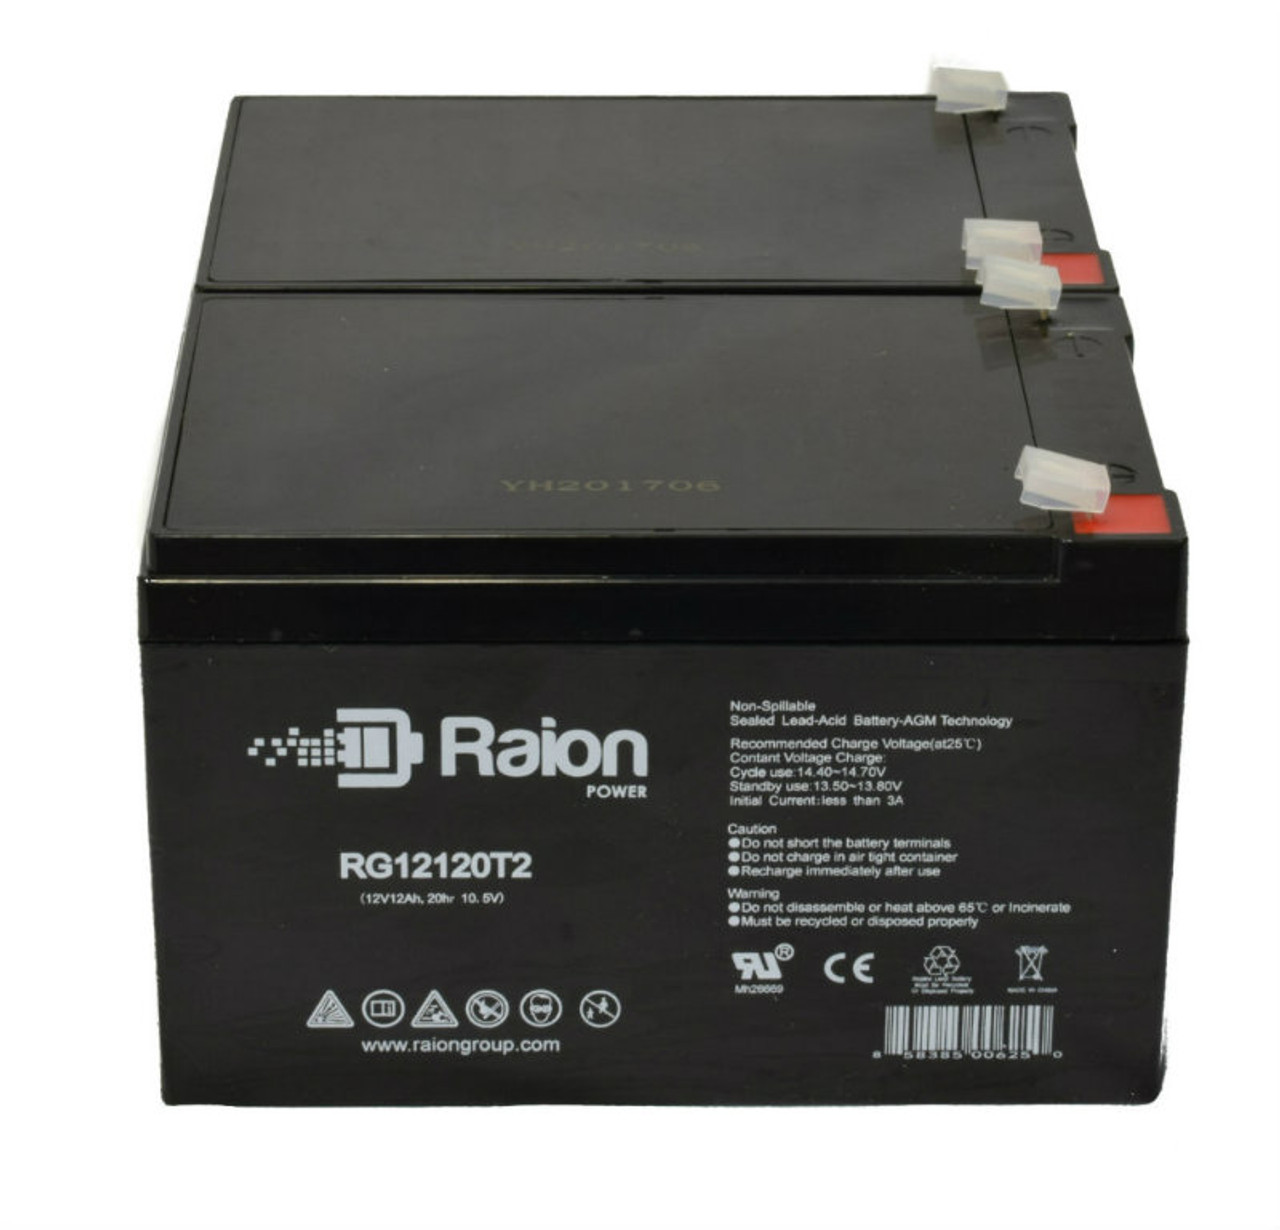 Raion Power RG12120T2 Replacement Battery Set for Drive Medical Design Bobcat 4 Wheel Mobility Scooter - 2 Pack